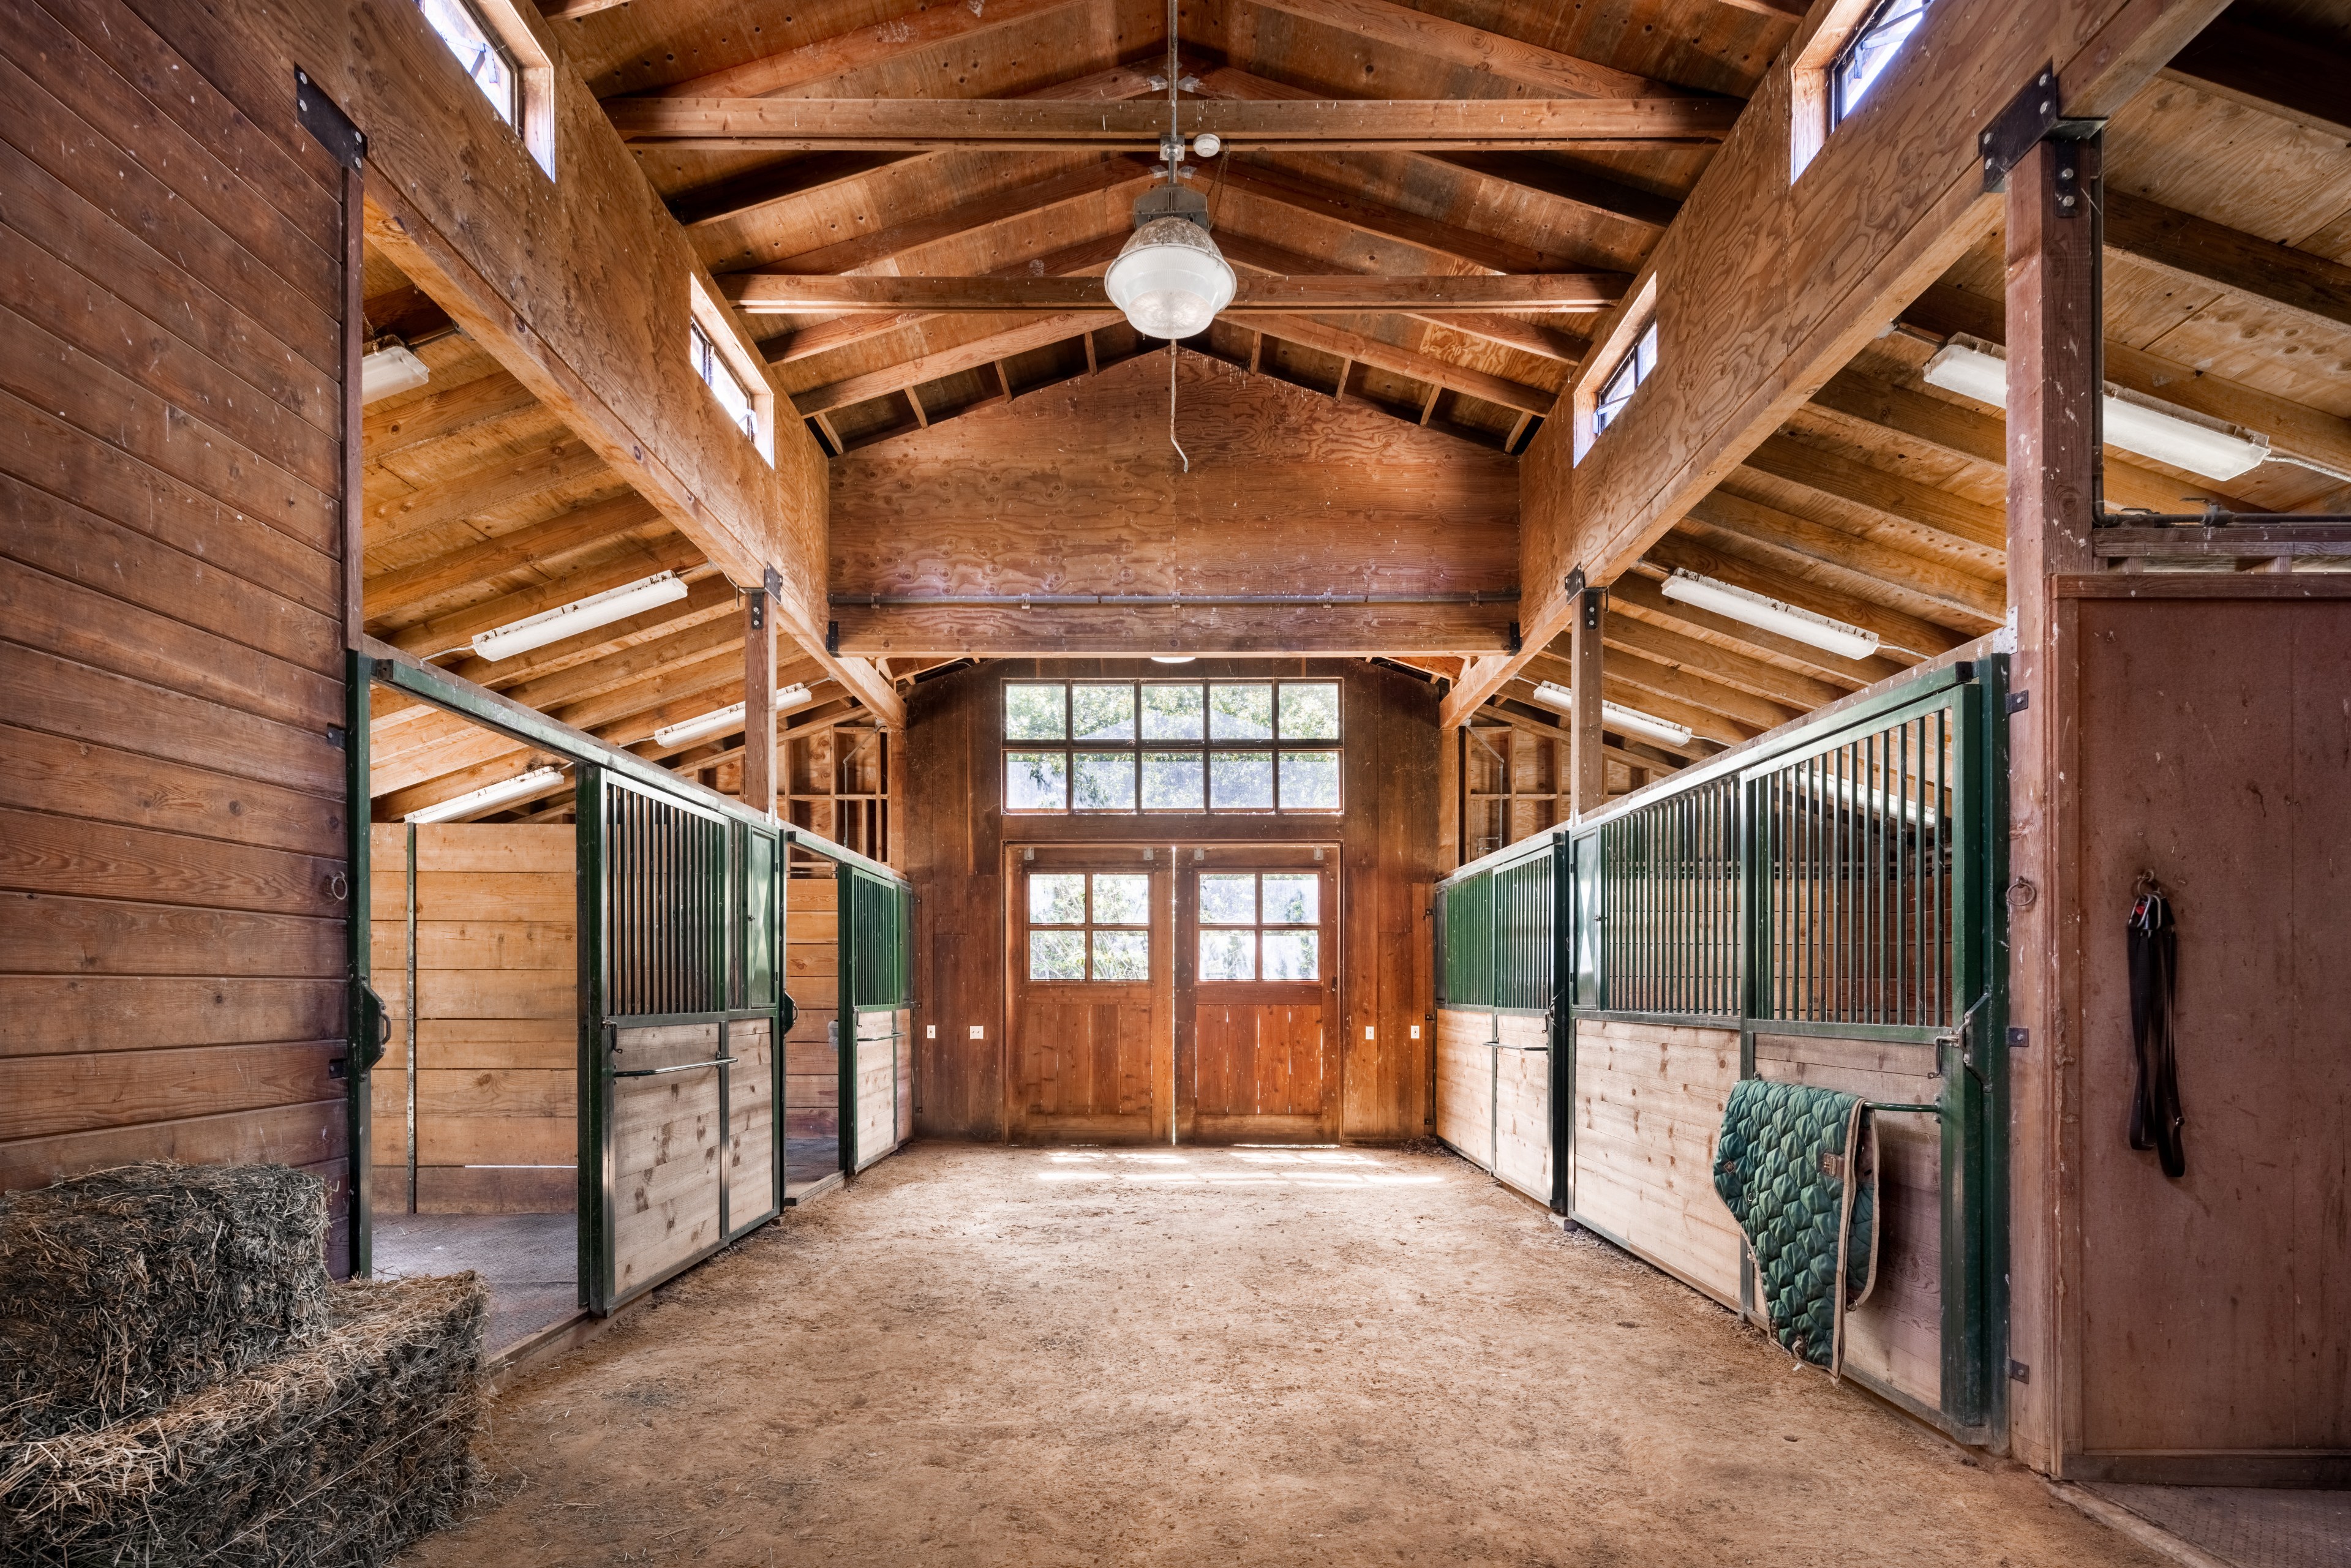 An empty wooden barn with horse stalls, hay bales, and tack hanging on the wall.